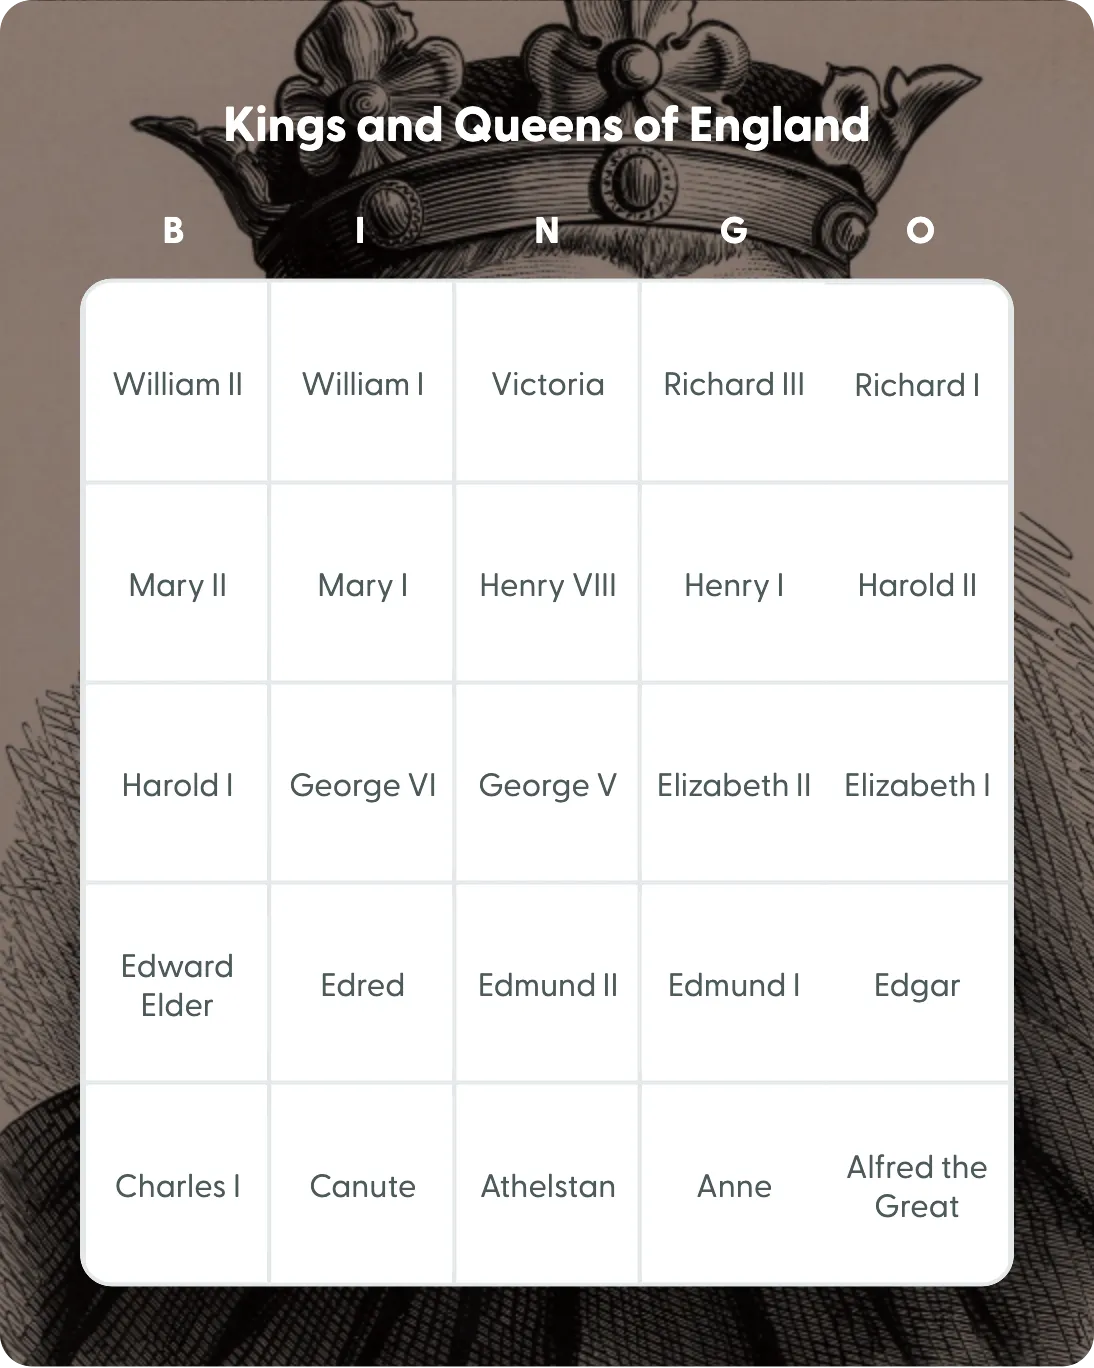 Kings and Queens of England bingo card